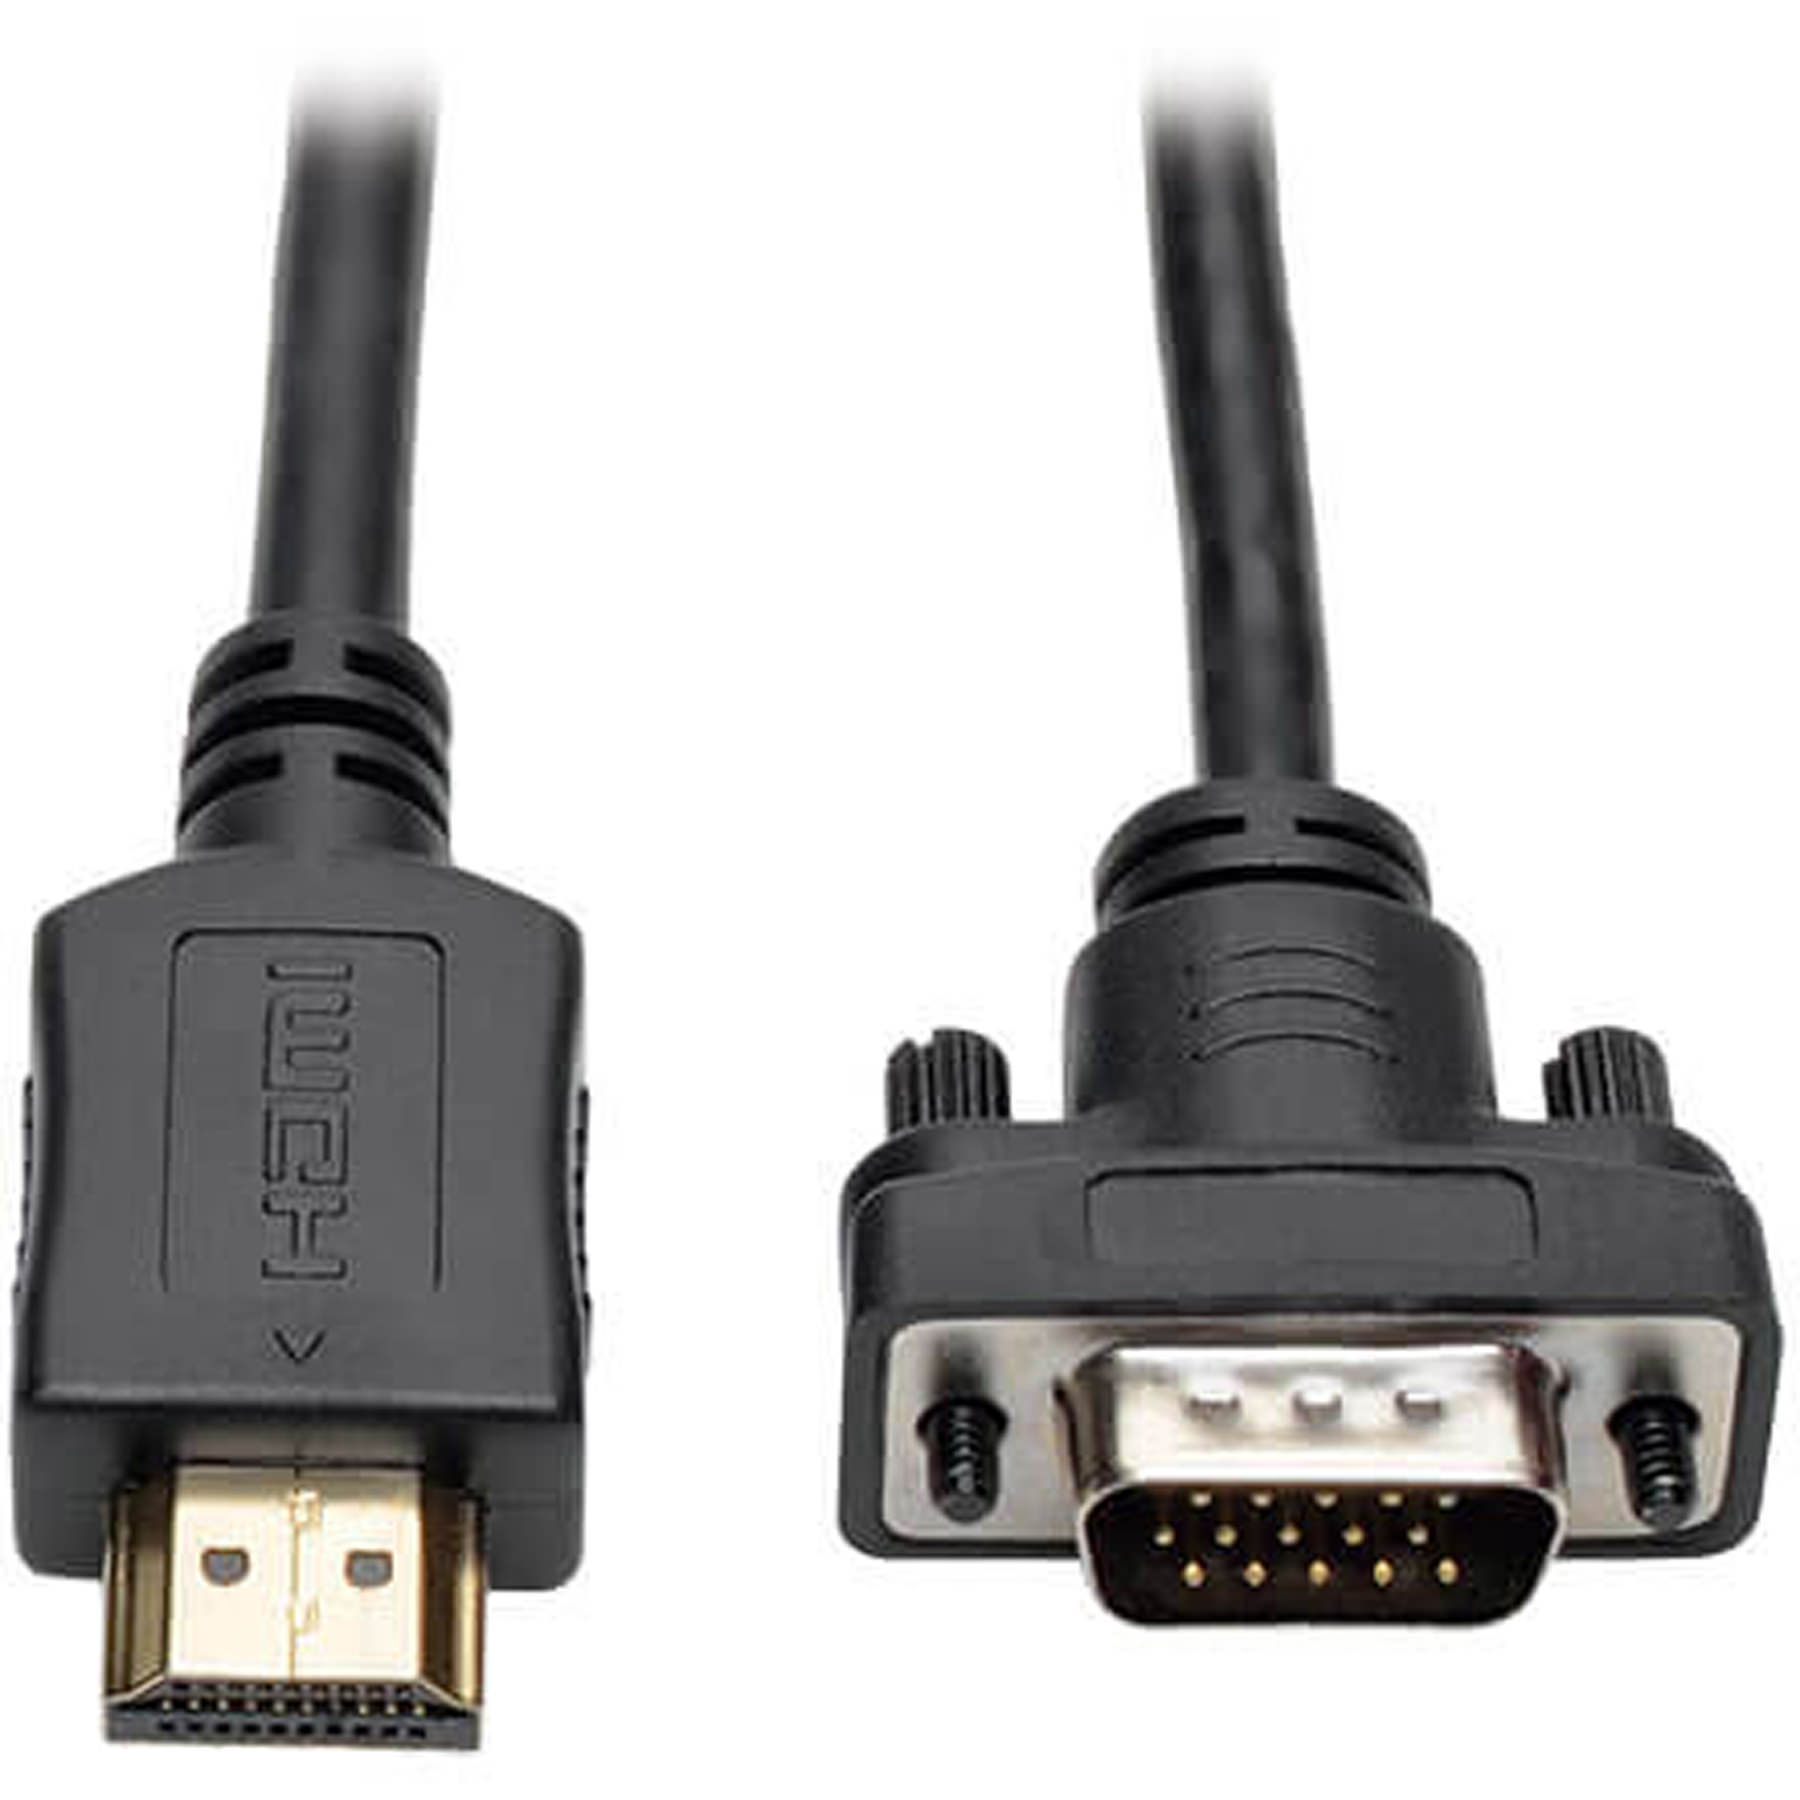 60Hz Converter Cable Supporting Up to 1920 x 1080 Plugable HDMI to VGA Adapter 6 Foot 1.8 Meter 